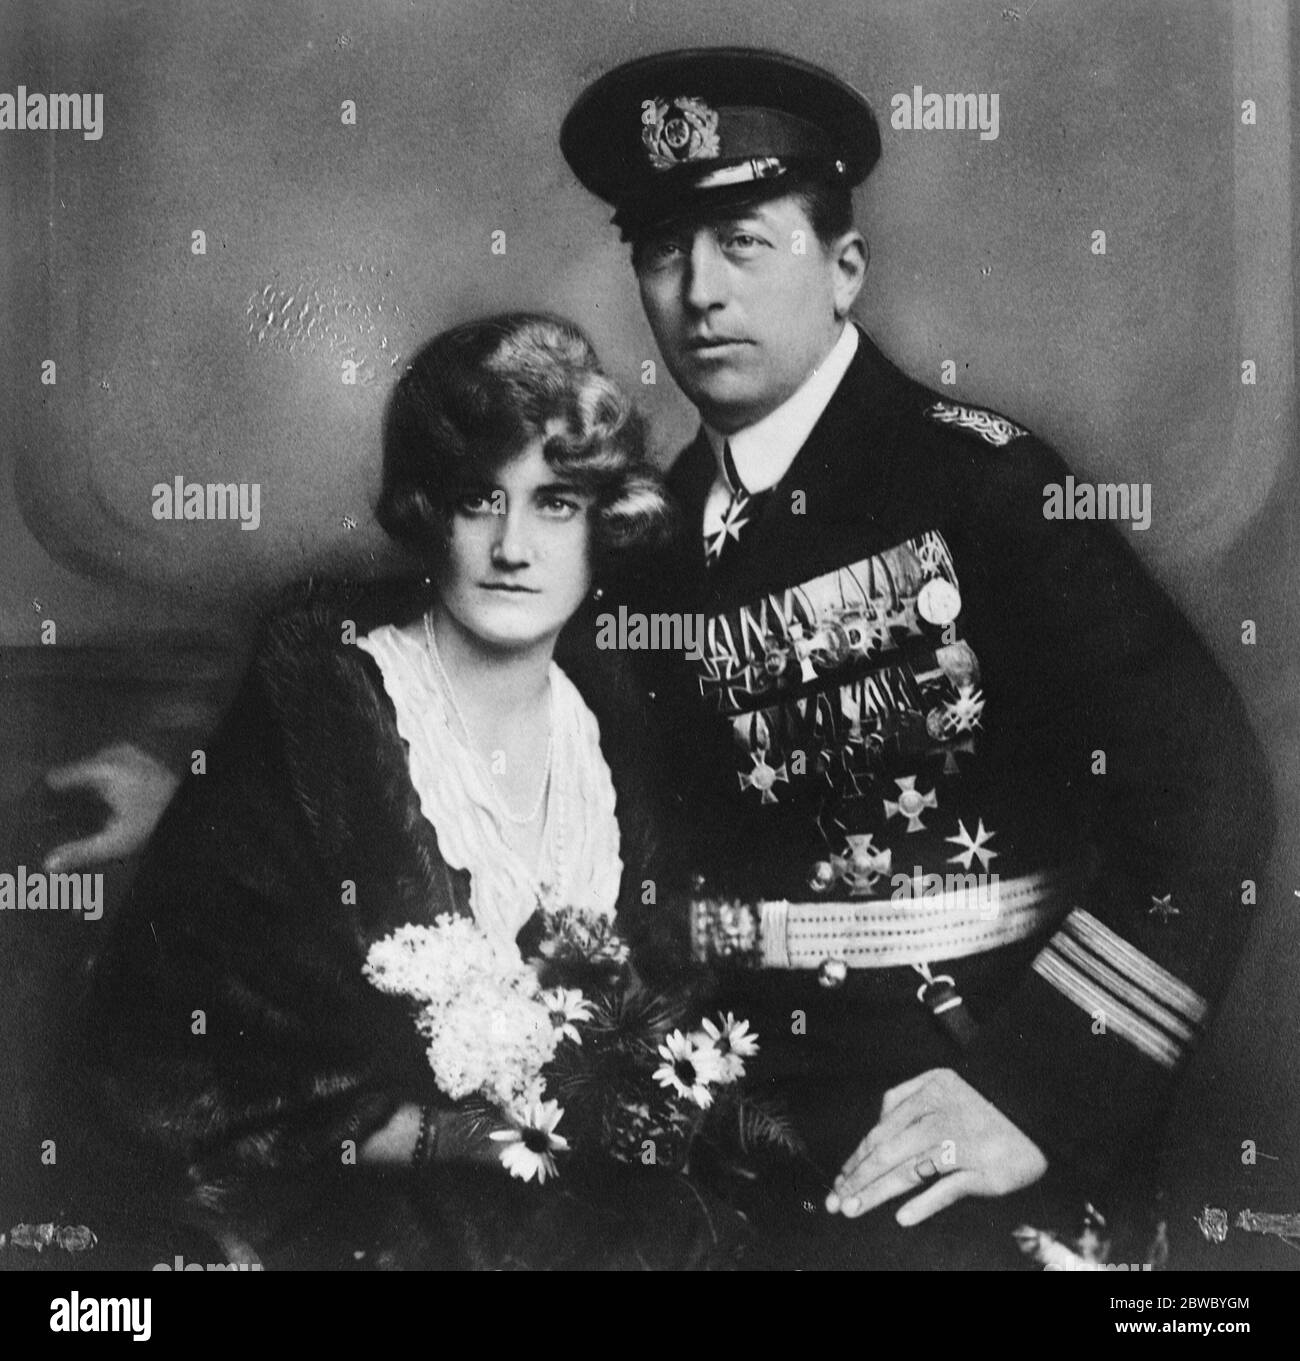 Former German ' raider ' becomes a film star . Count Felix von Luckner , who , during the war commanded the German raider ' Seedler ' , has become a film actor with the Vera Company of Hamburg . Count and Countess Felix von Luckner . 12 January 1927 Stock Photo